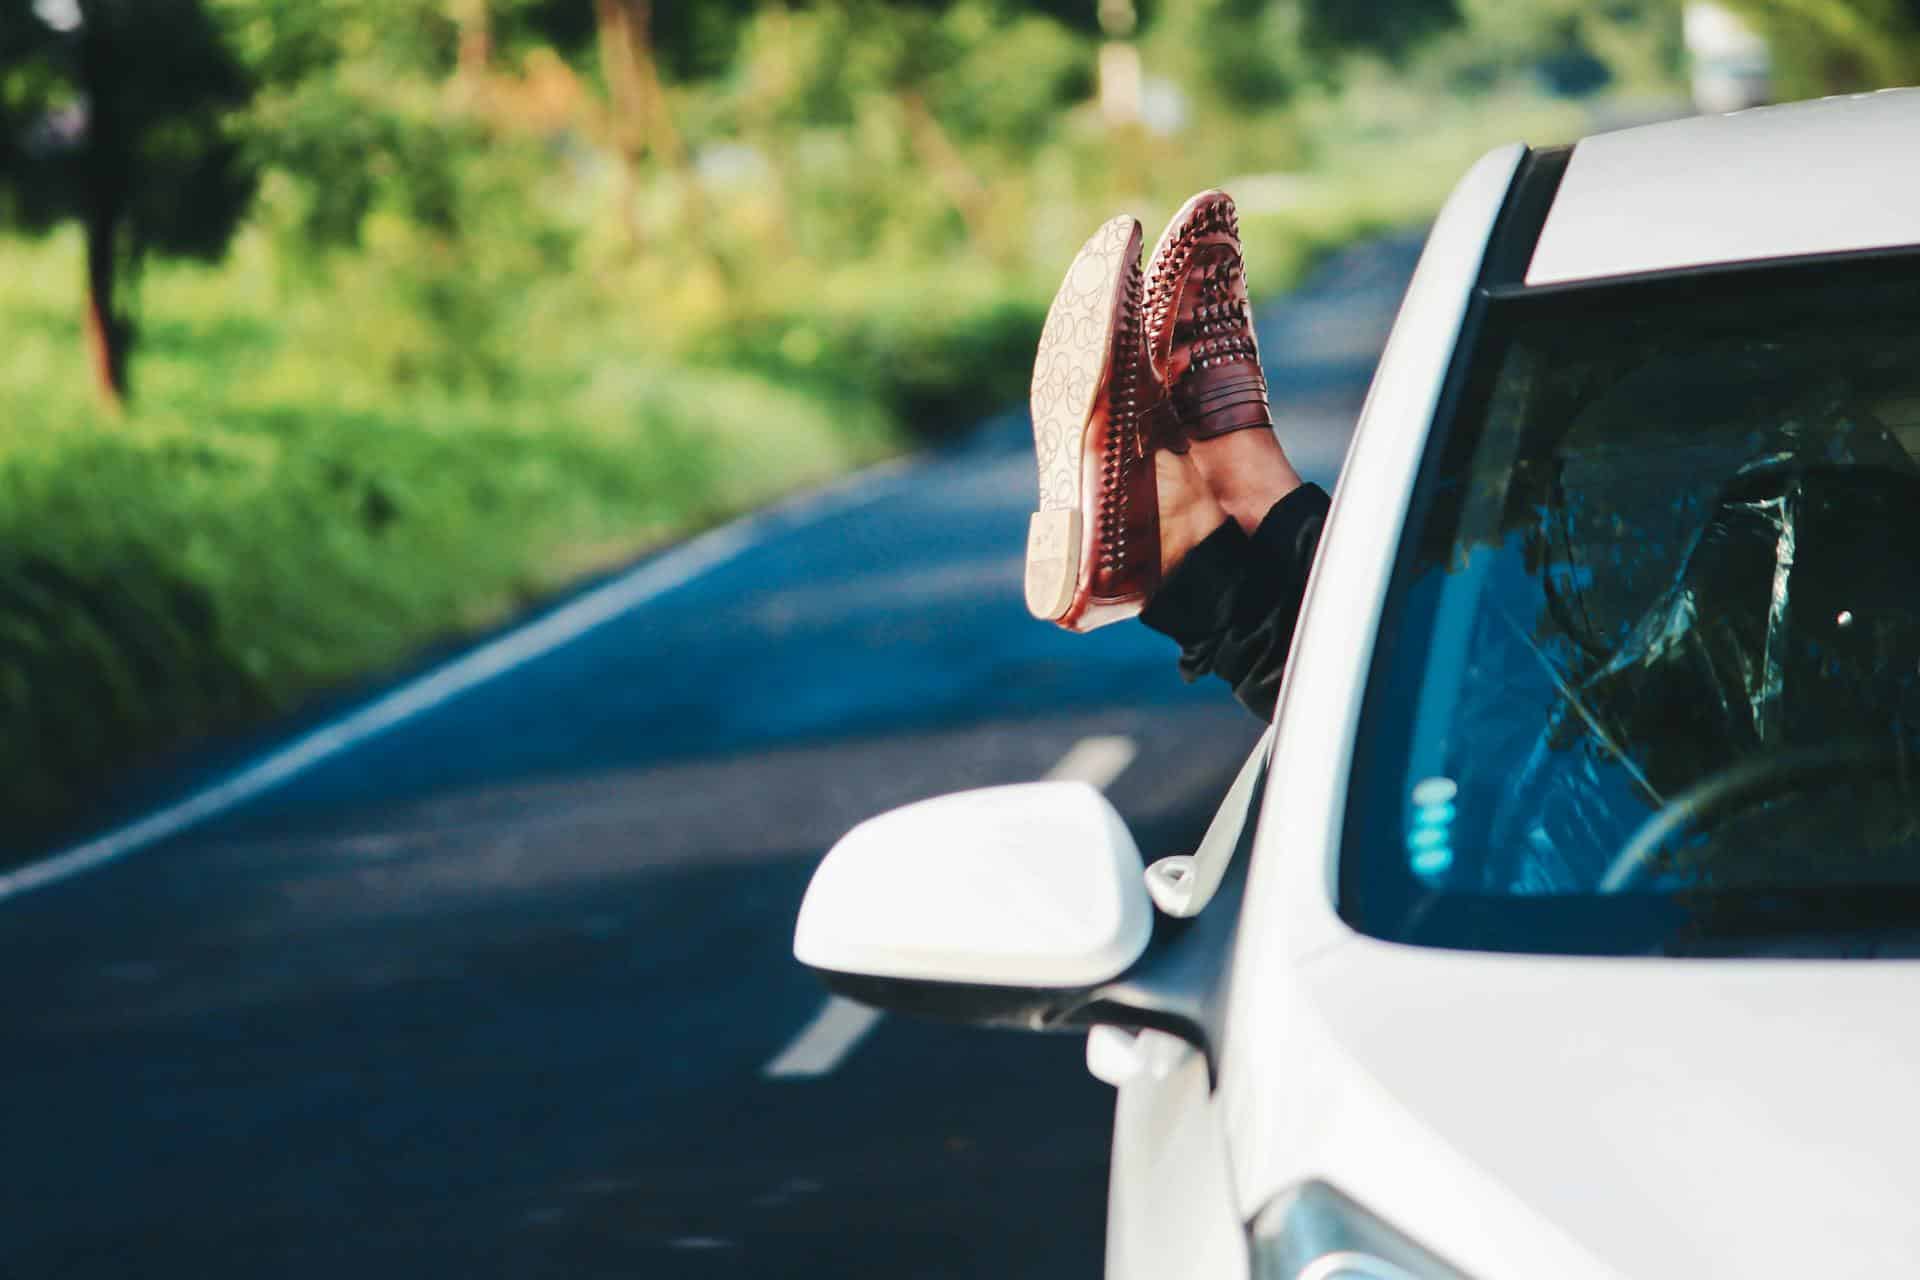 A pair of feet hang out the driver's side of a car while it drives down a road.